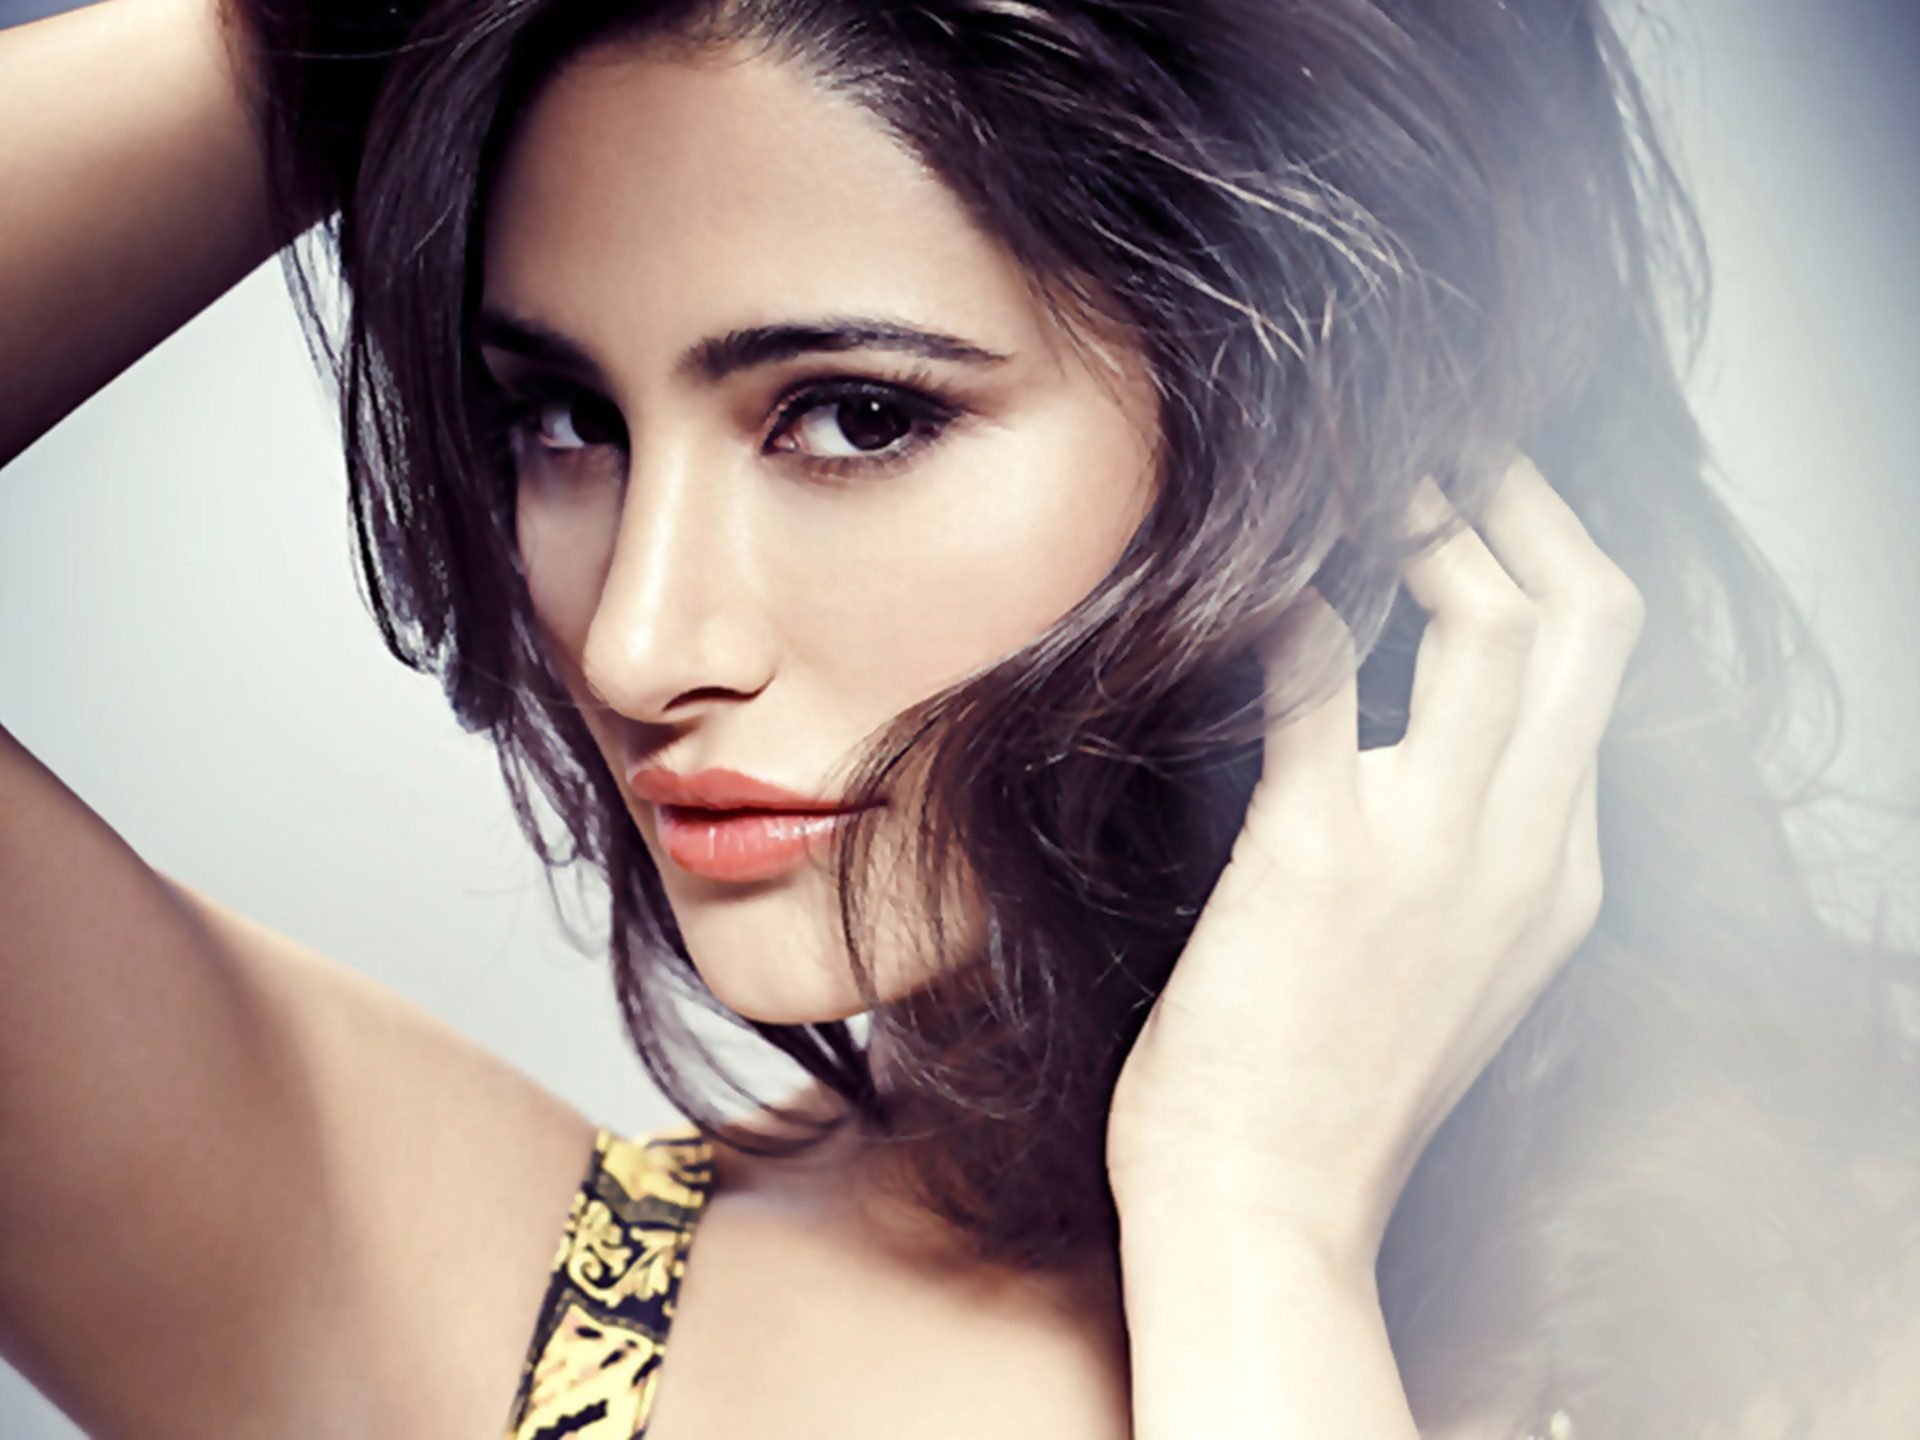 Nargis Fakhri Actress Bollywood Model Babe 63 Wallpapers Hd Desktop And Mobile Backgrounds